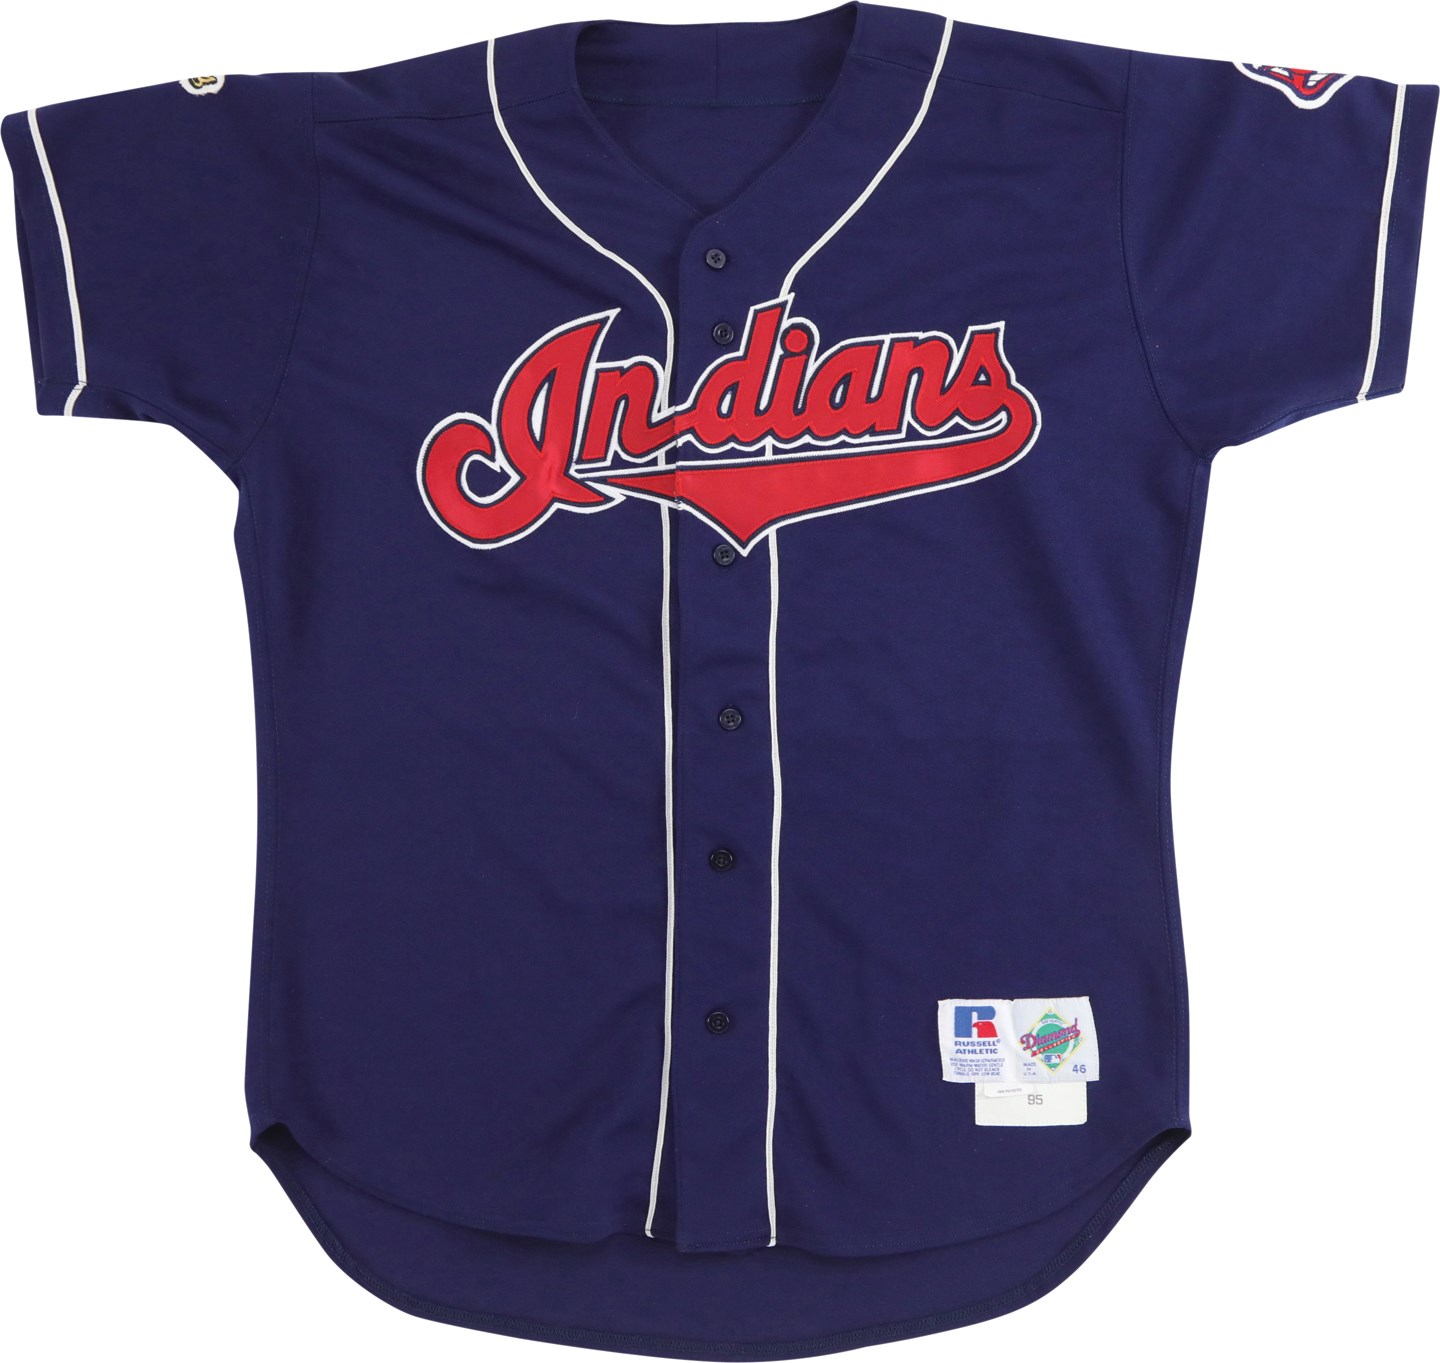 Baseball Equipment - 1995 Carlos Baerga Cleveland Indians Game Worn Jersey - Prepped for World Series